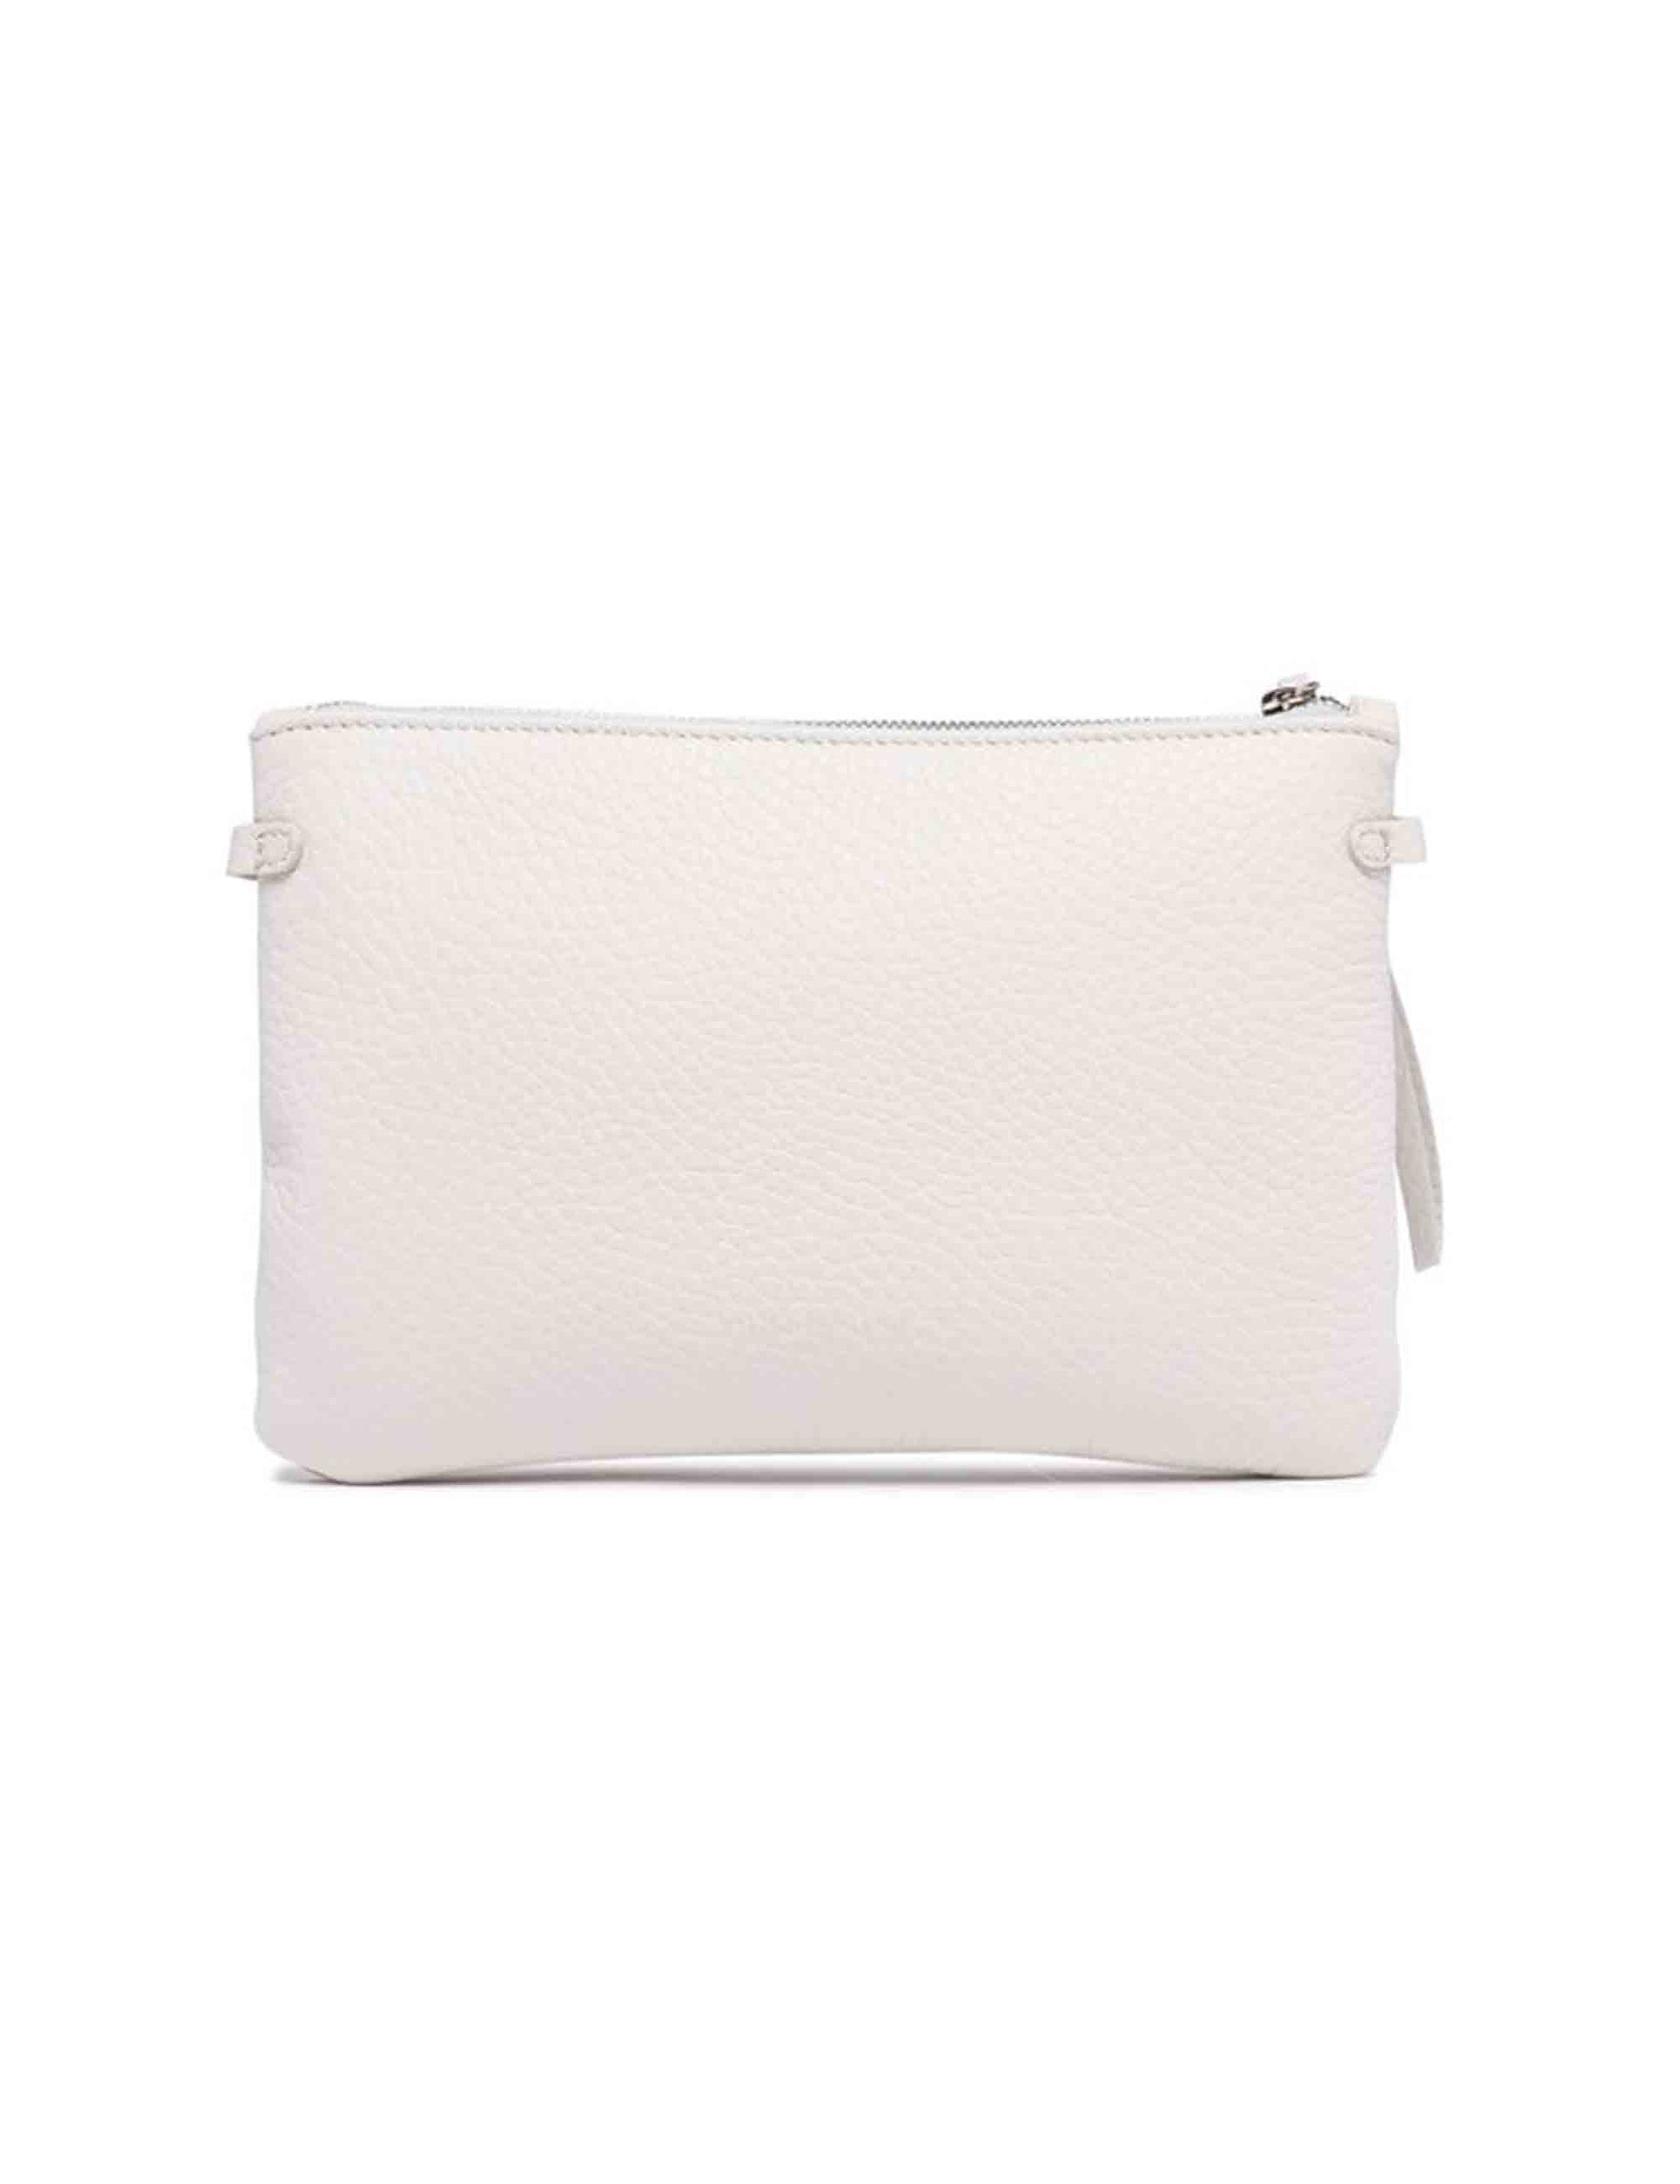 Hermy women's clutch bags in cream and natural leather with bracelet handle and shoulder strap